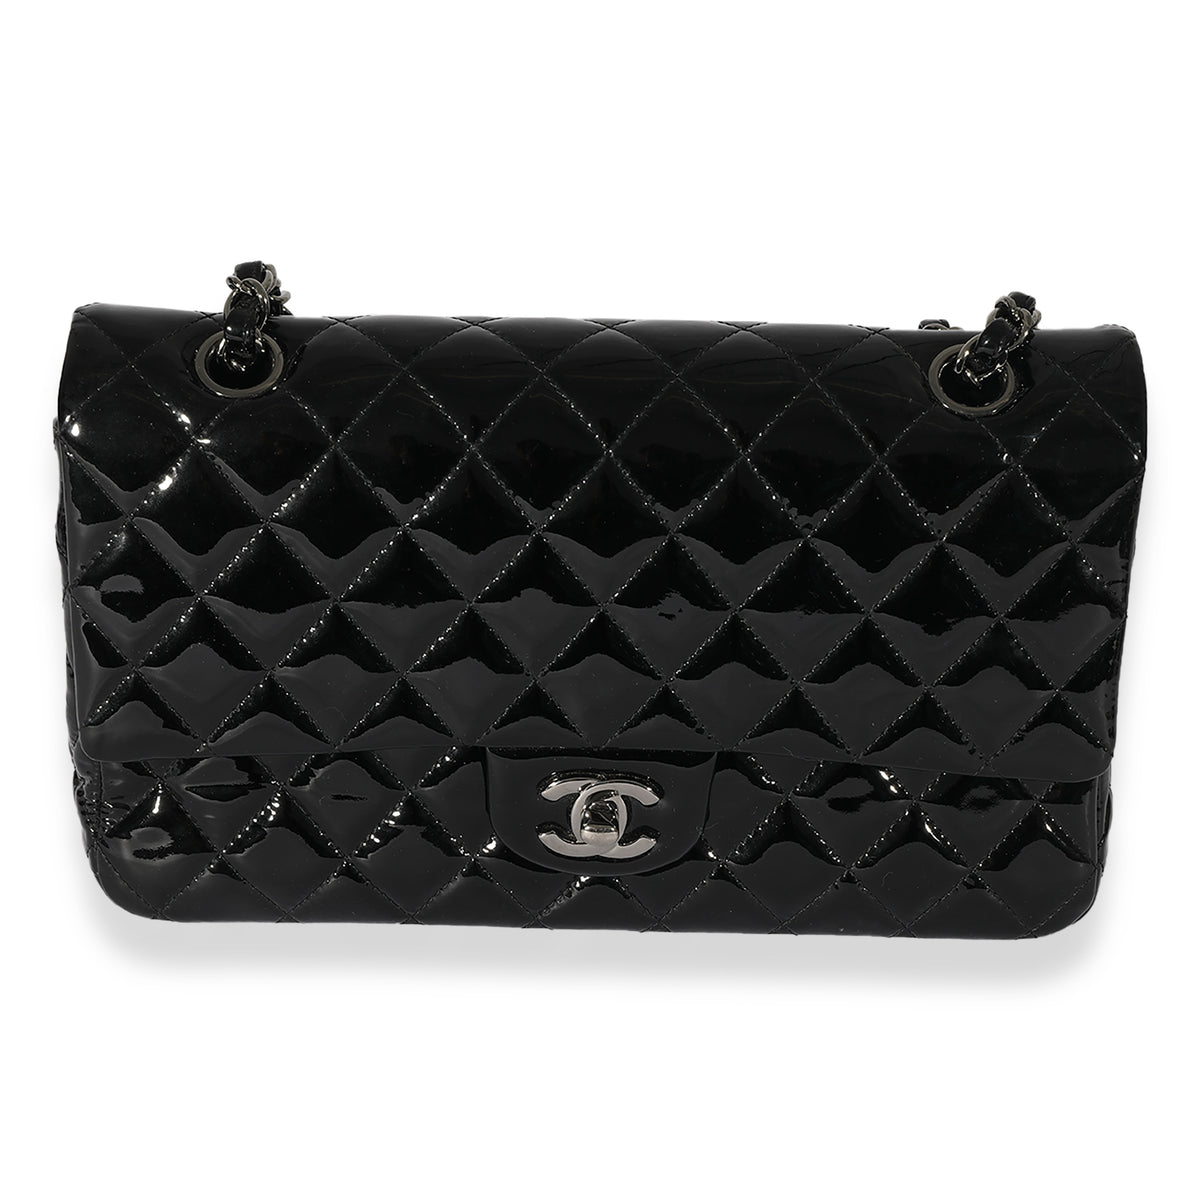 Chanel Black Quilted Patent Leather Medium Classic Double Flap Bag, myGemma